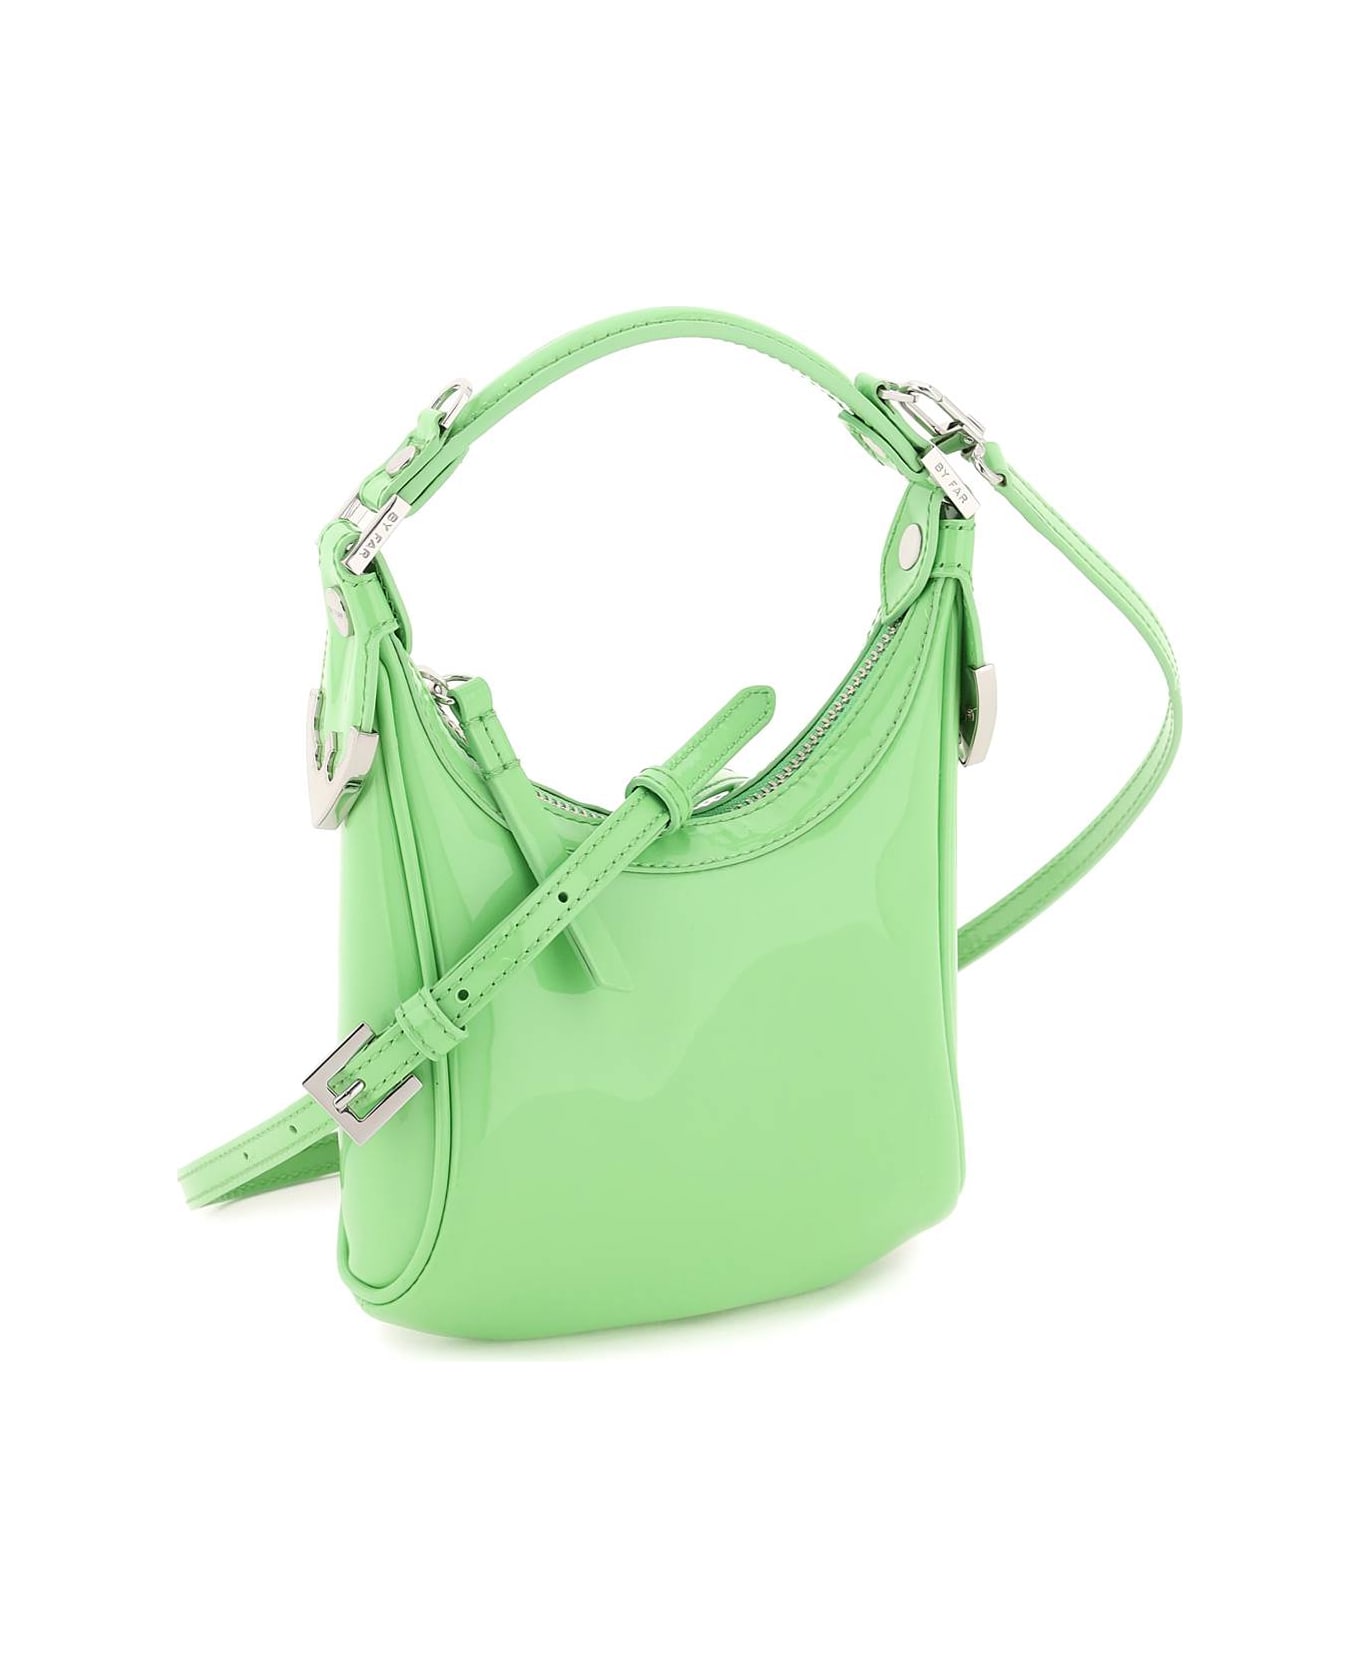 BY FAR Patent Leather 'cosmo' Bag - FRESH GREEN (Green)